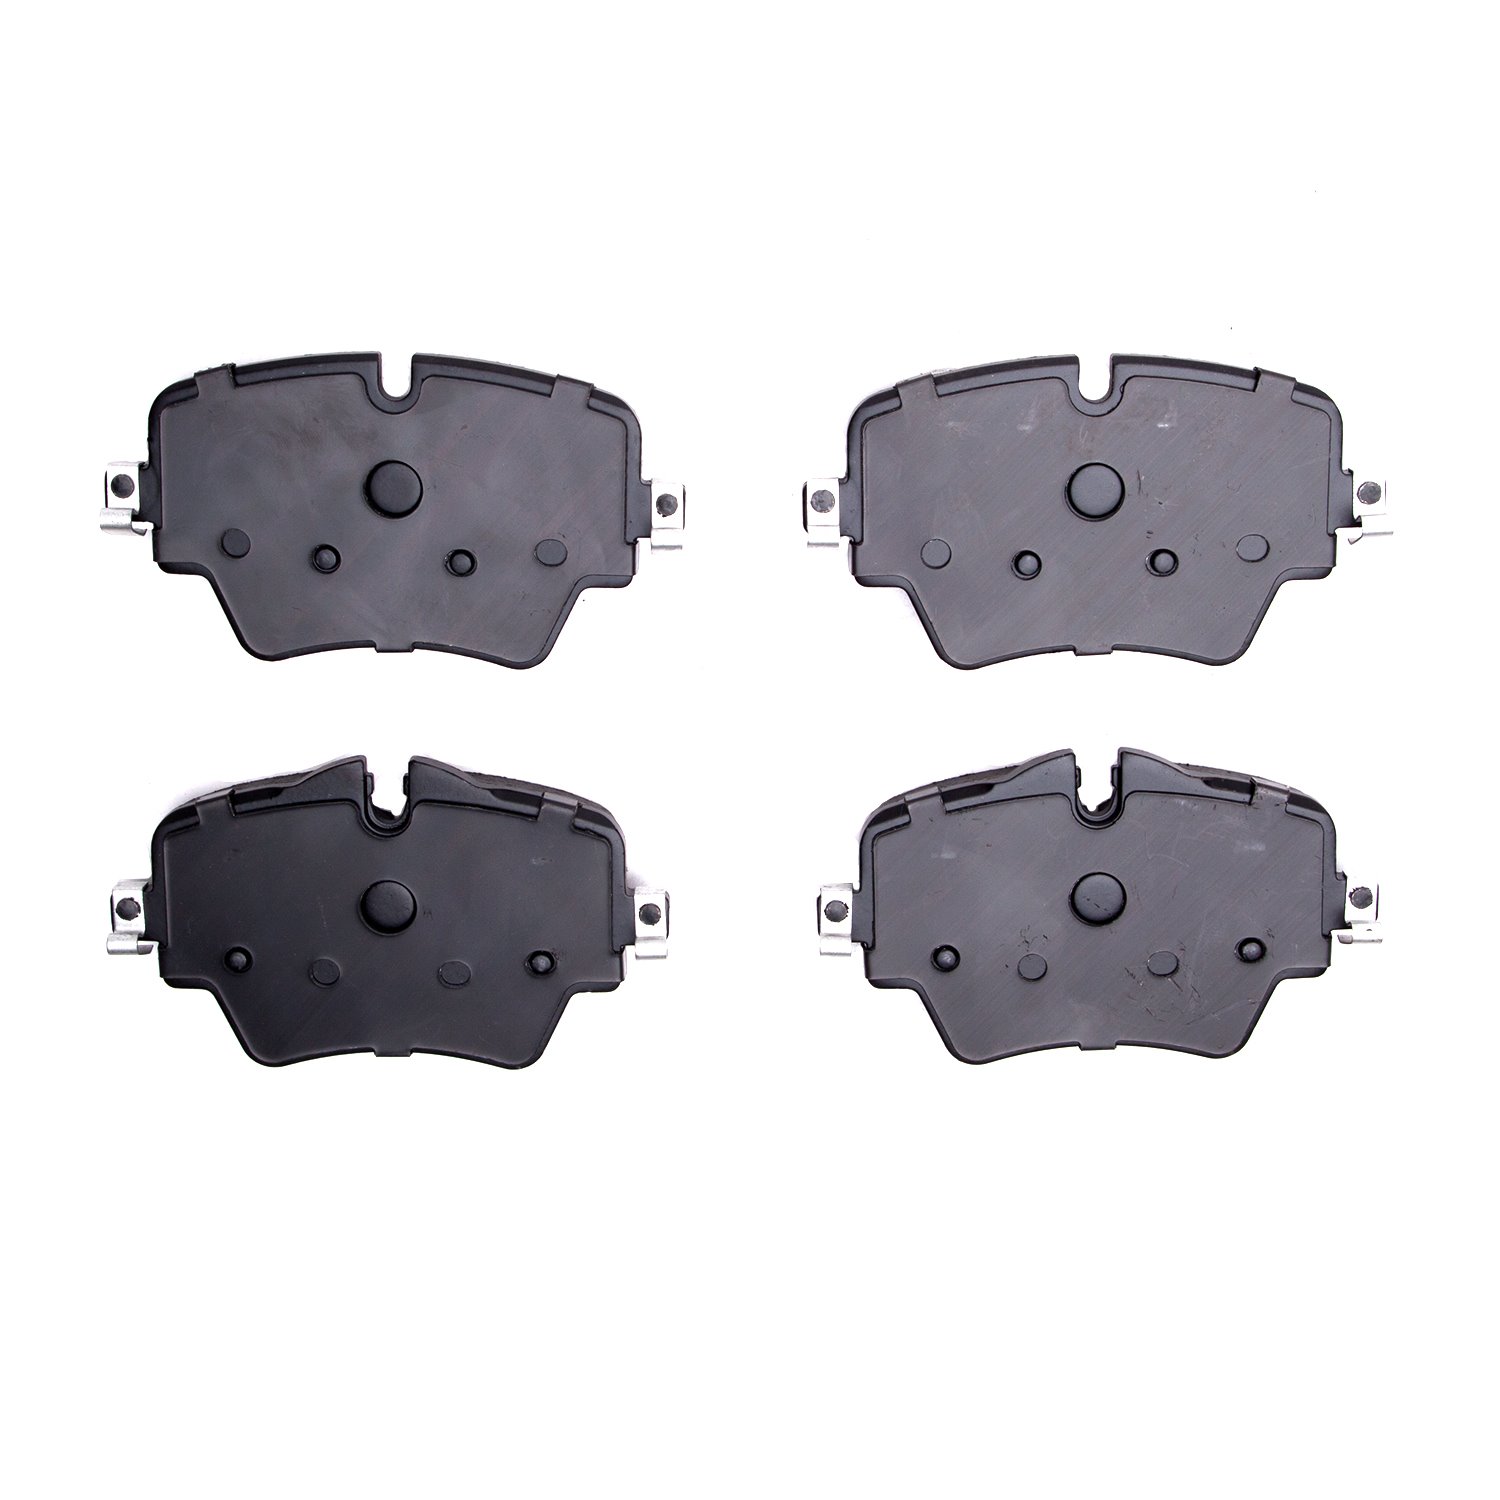 1115-1892-00 Active Performance Low-Metallic Brake Pads, Fits Select Multiple Makes/Models, Position: Front